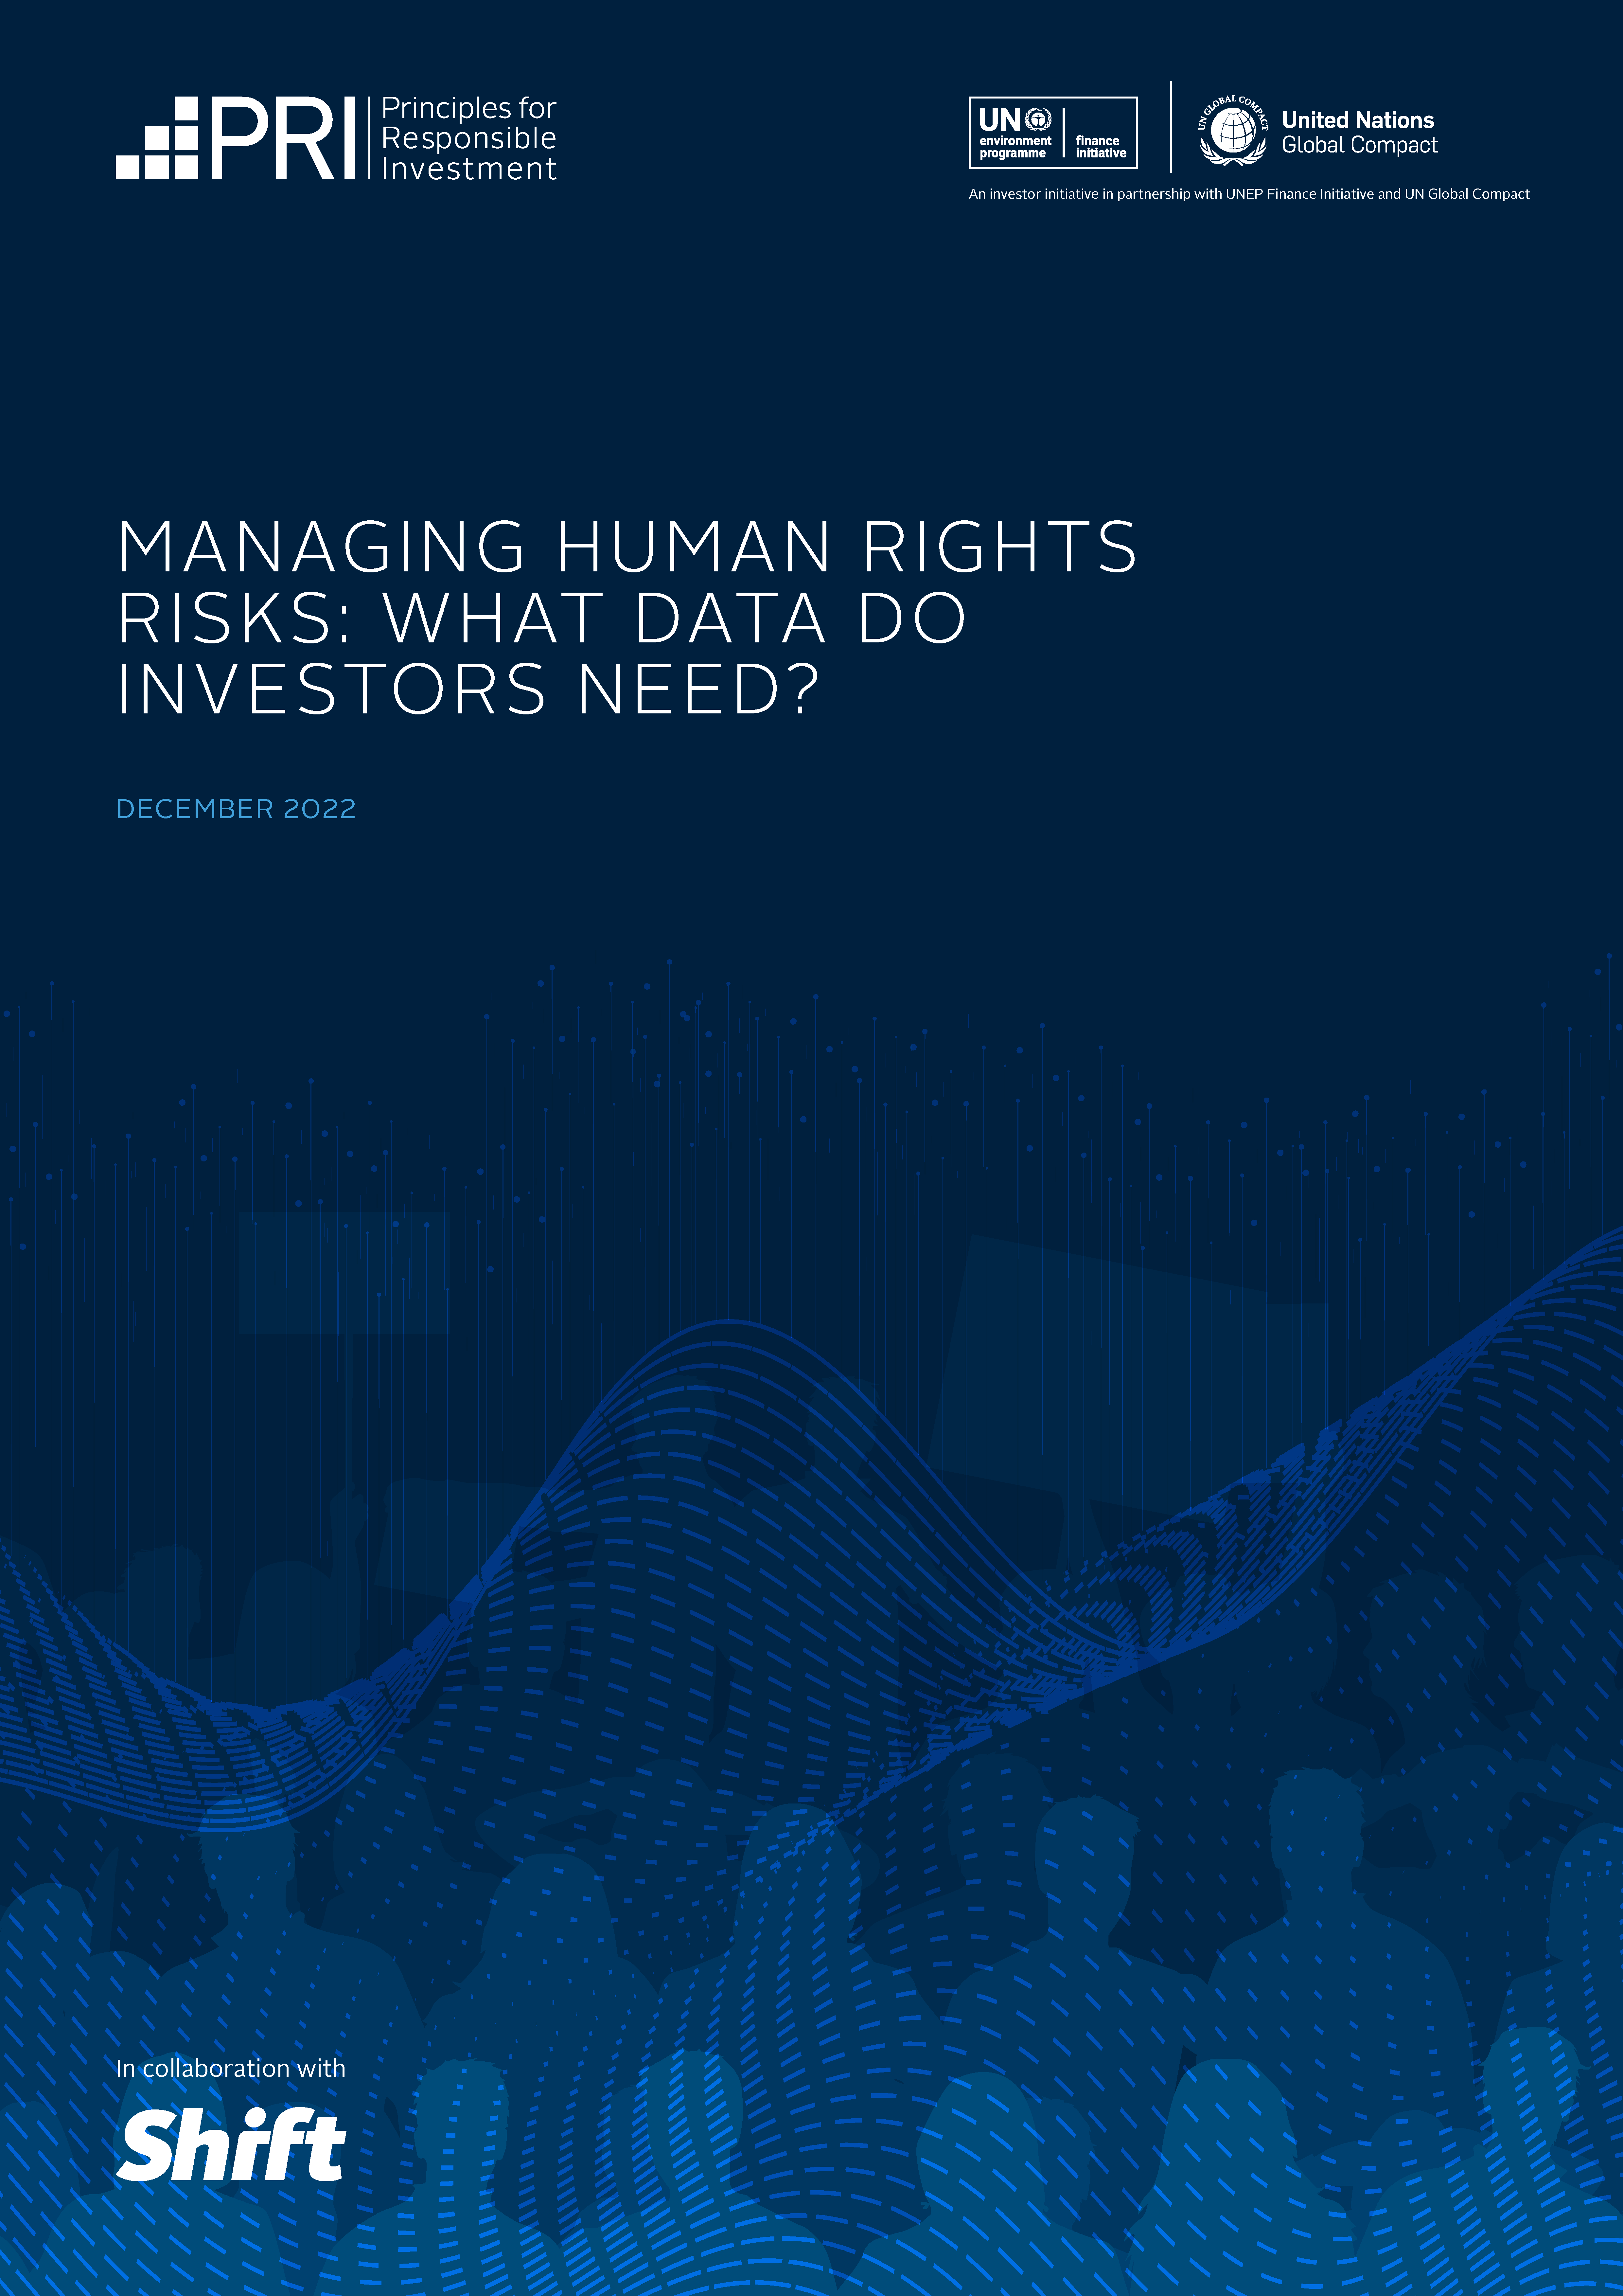 What data do investors need to manage human rights risks?